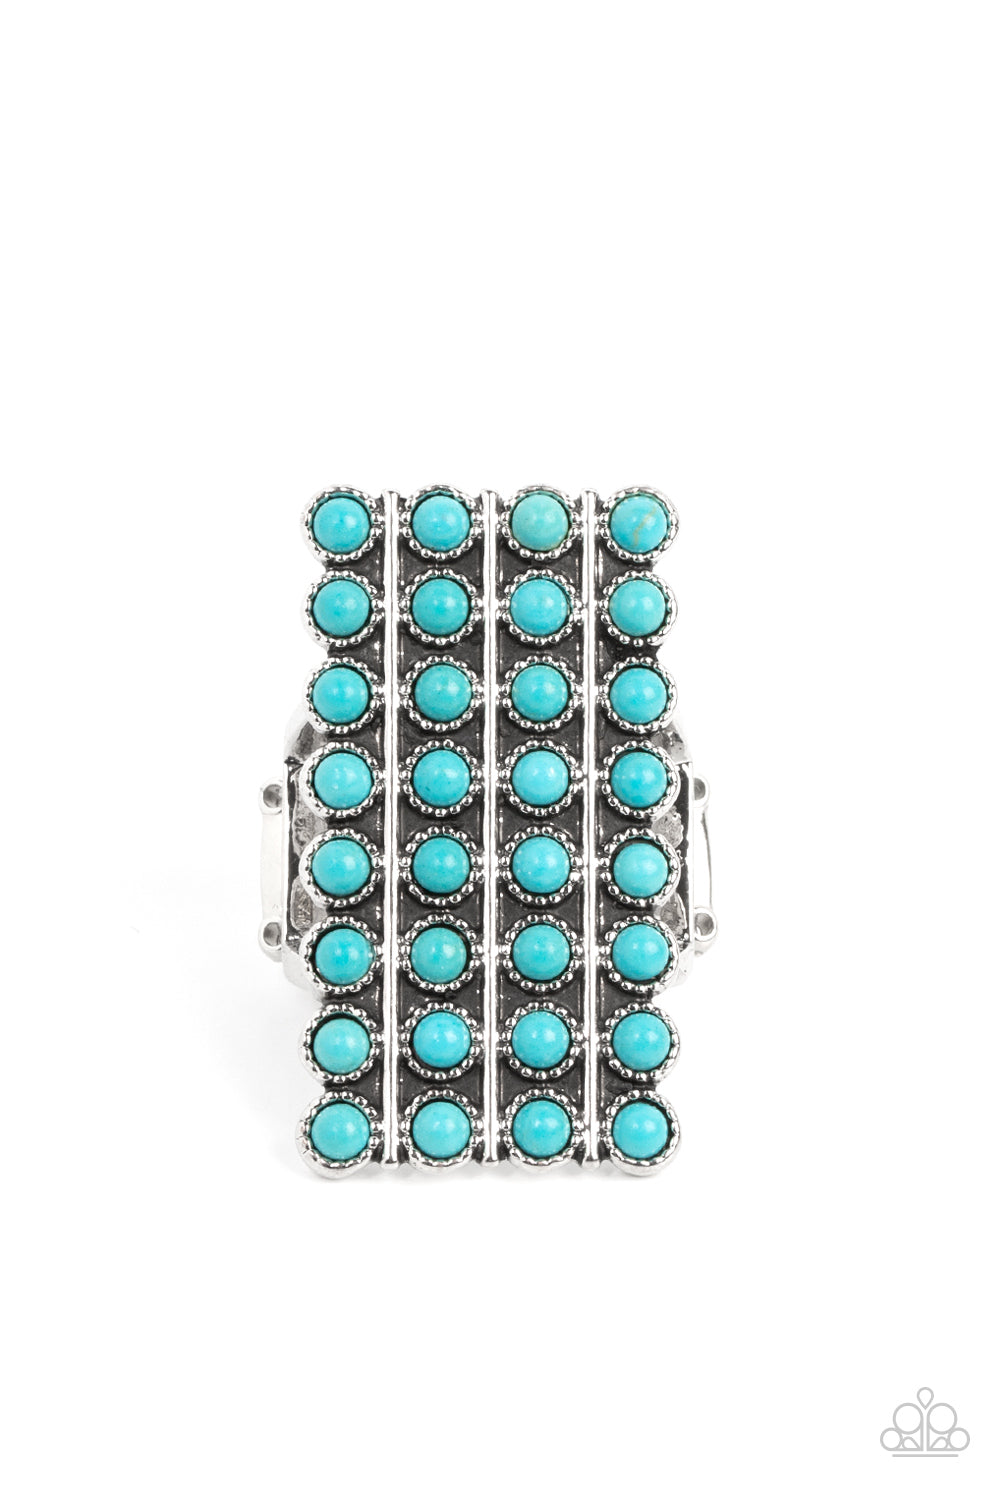 Pack Your SADDLEBAGS - Blue (Turquoise) Ring